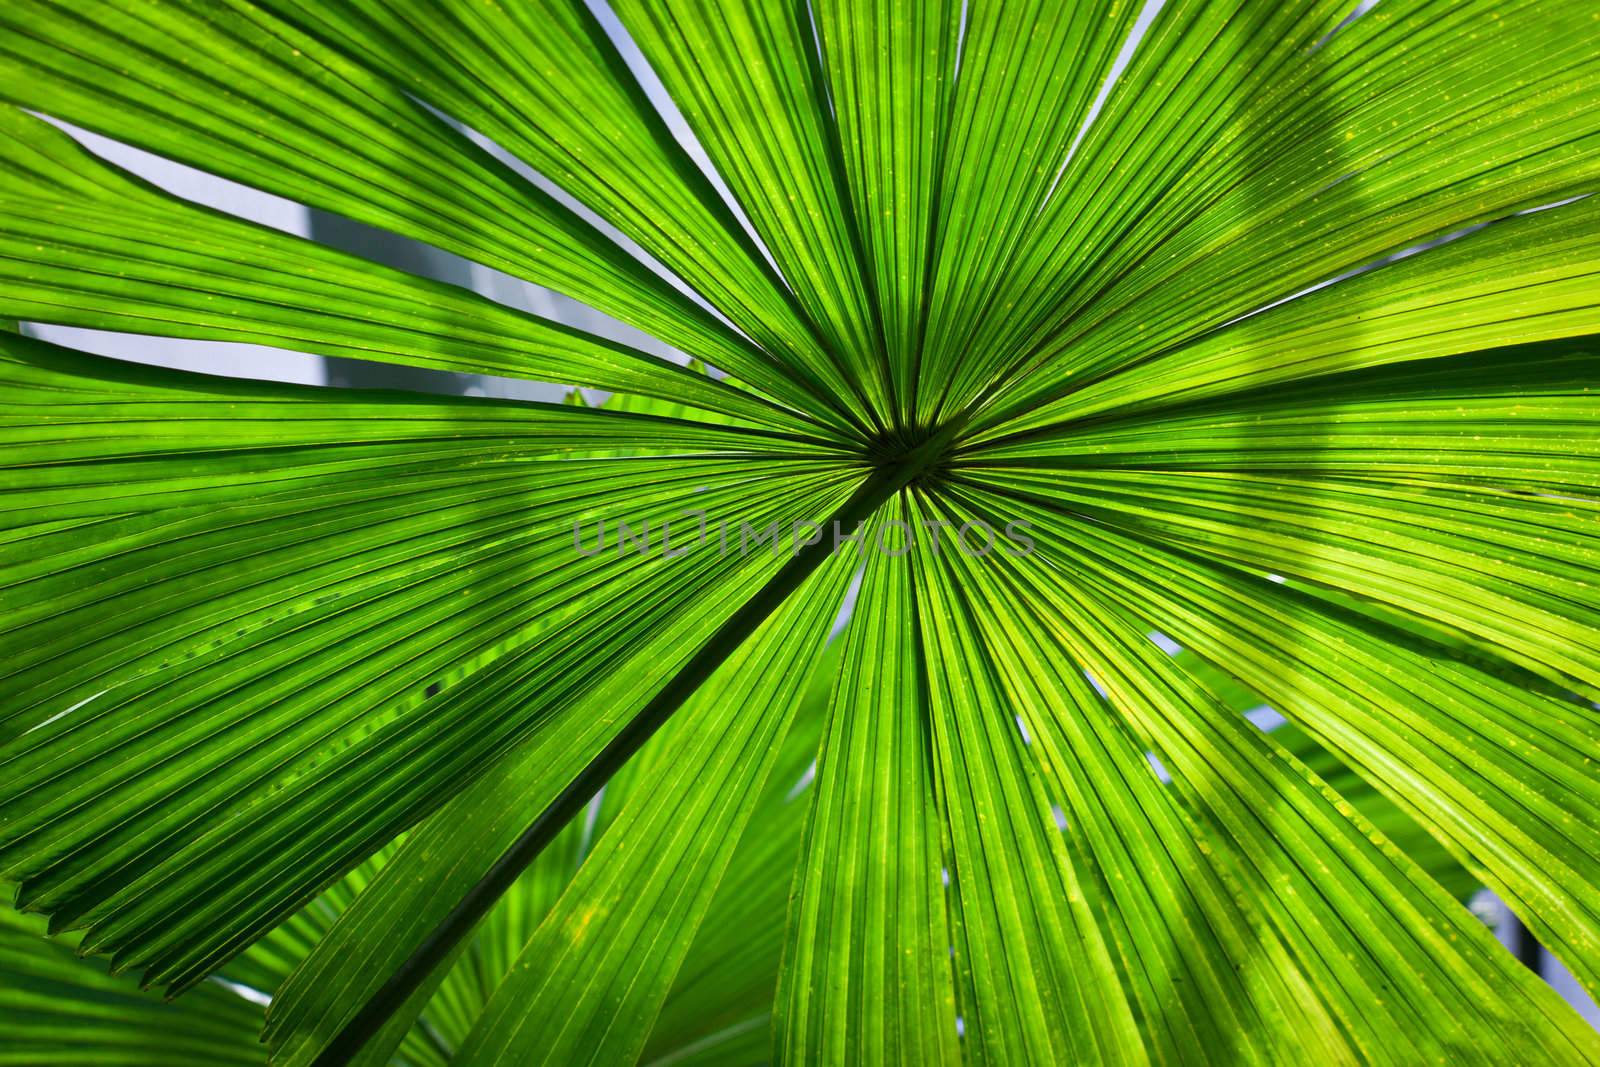 Beautiful vibrant, lush green fan palm frond or leaf